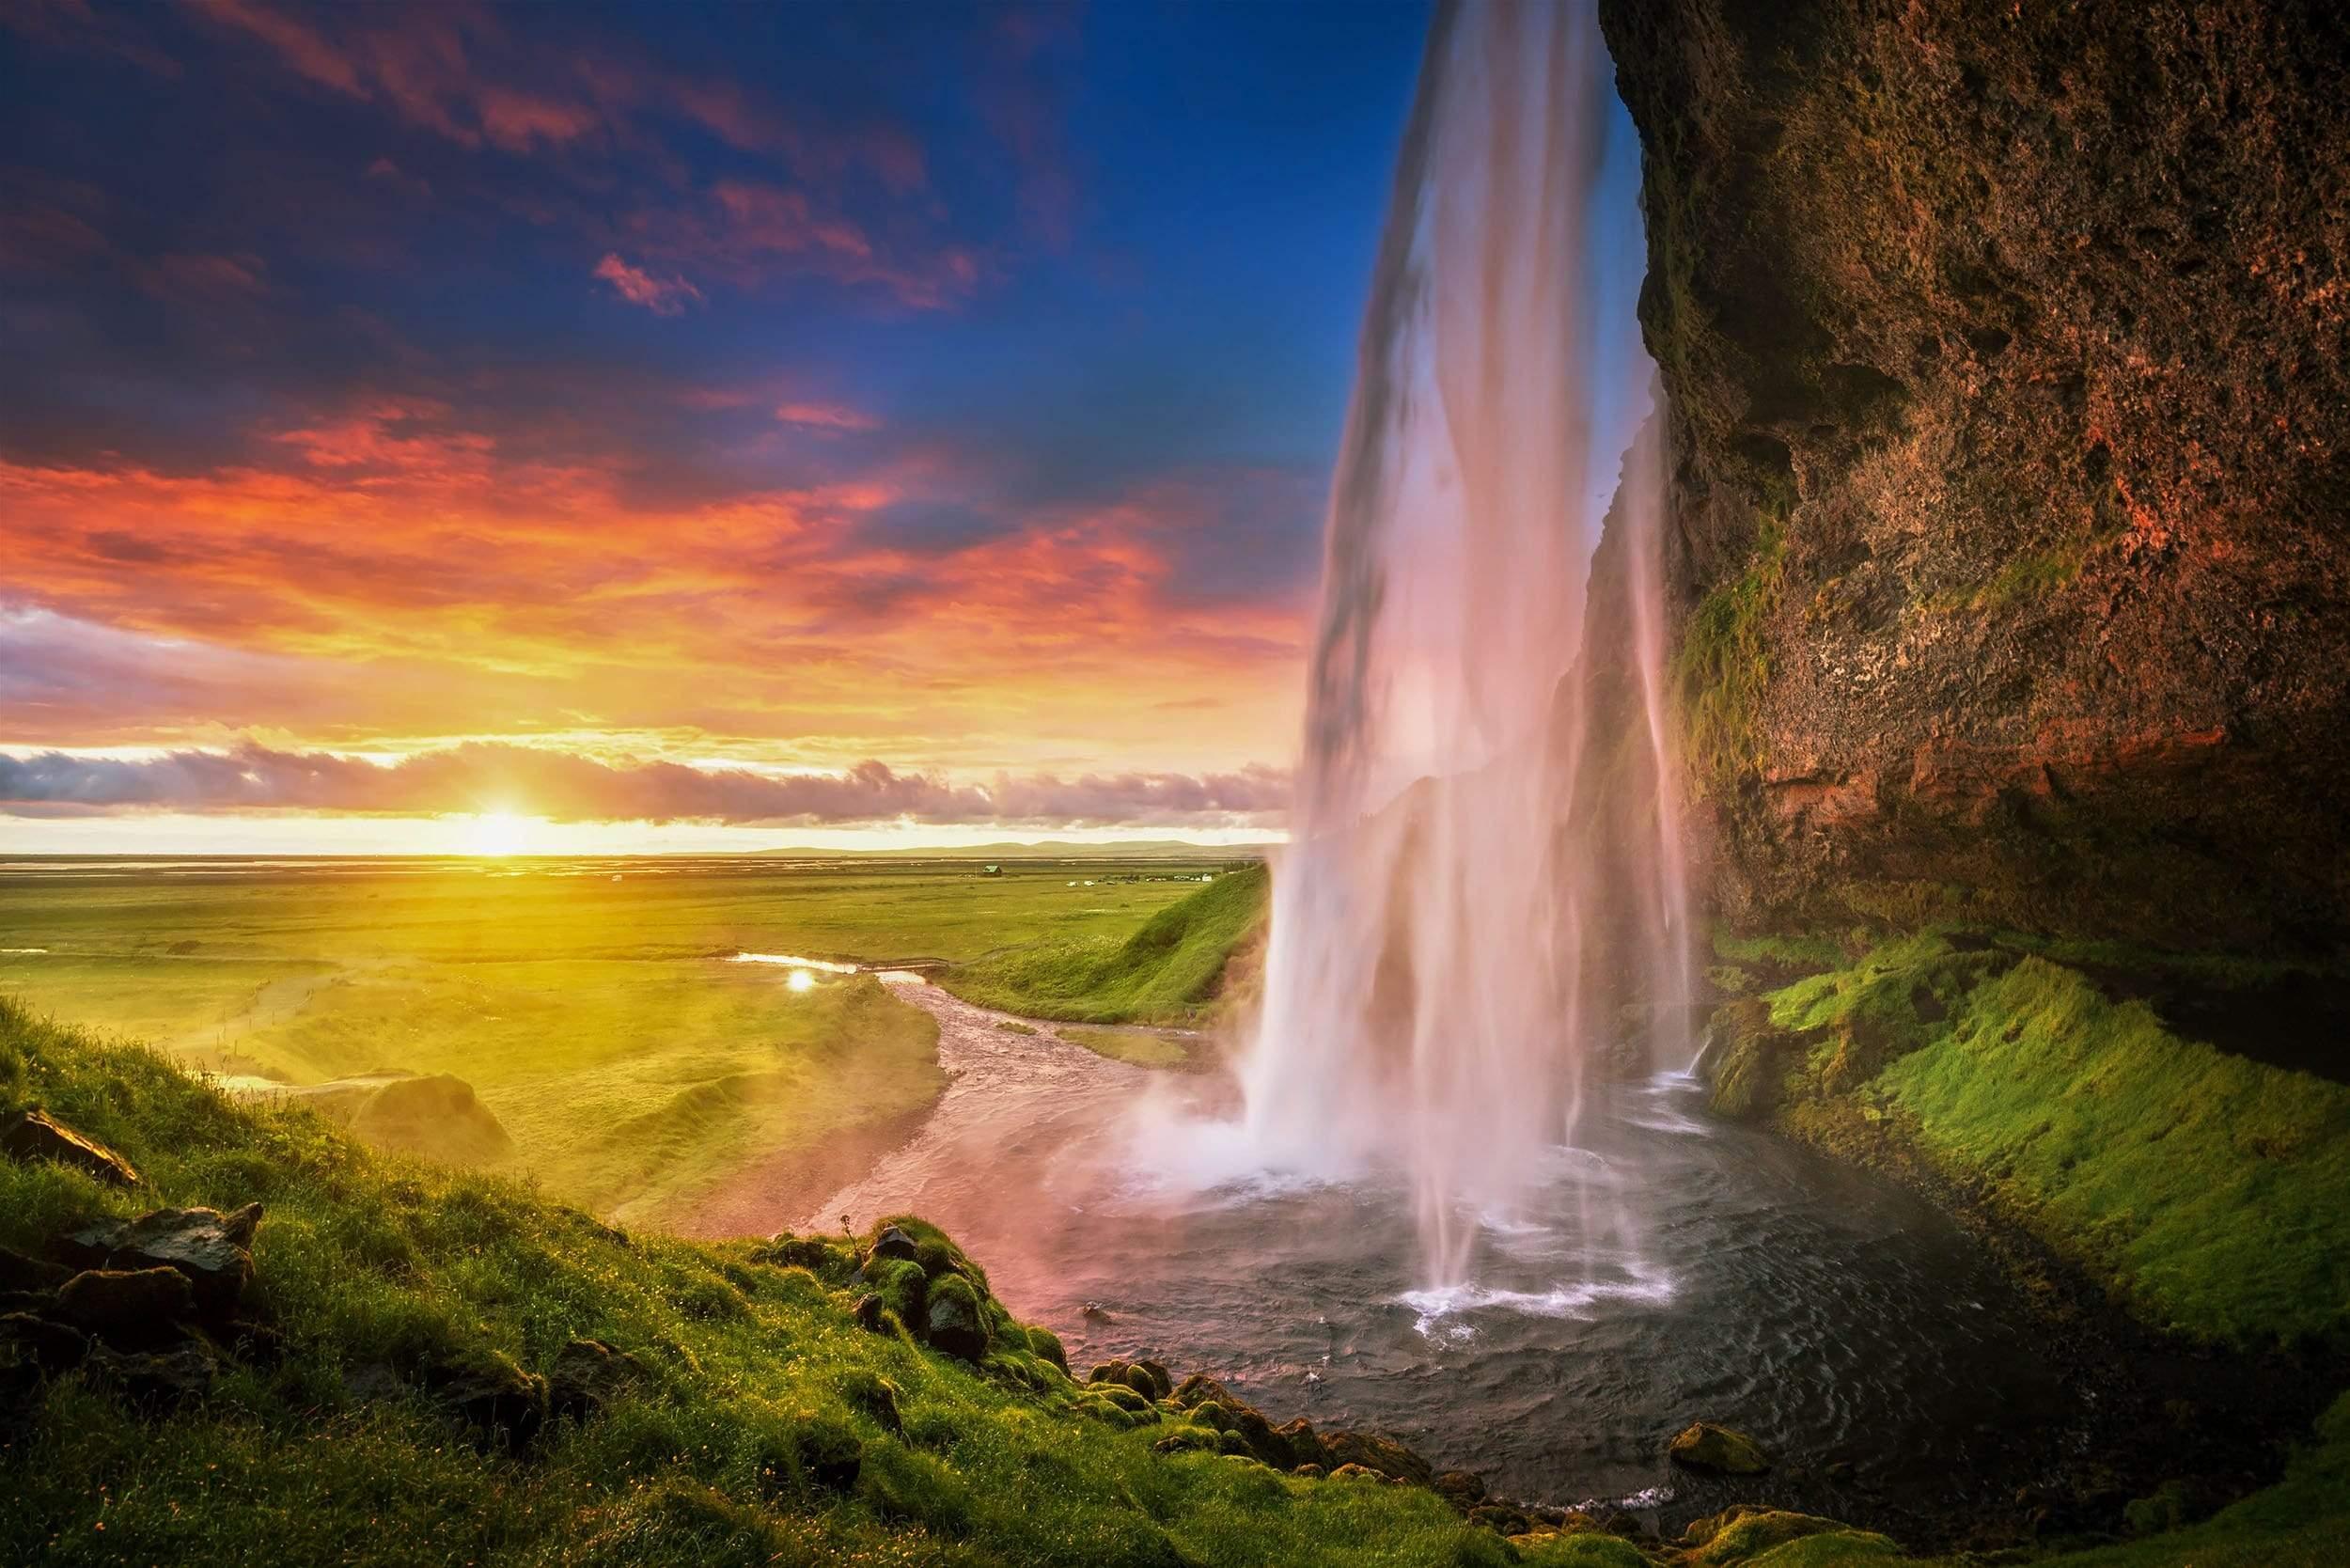 Waterfall flowing into River Sunset